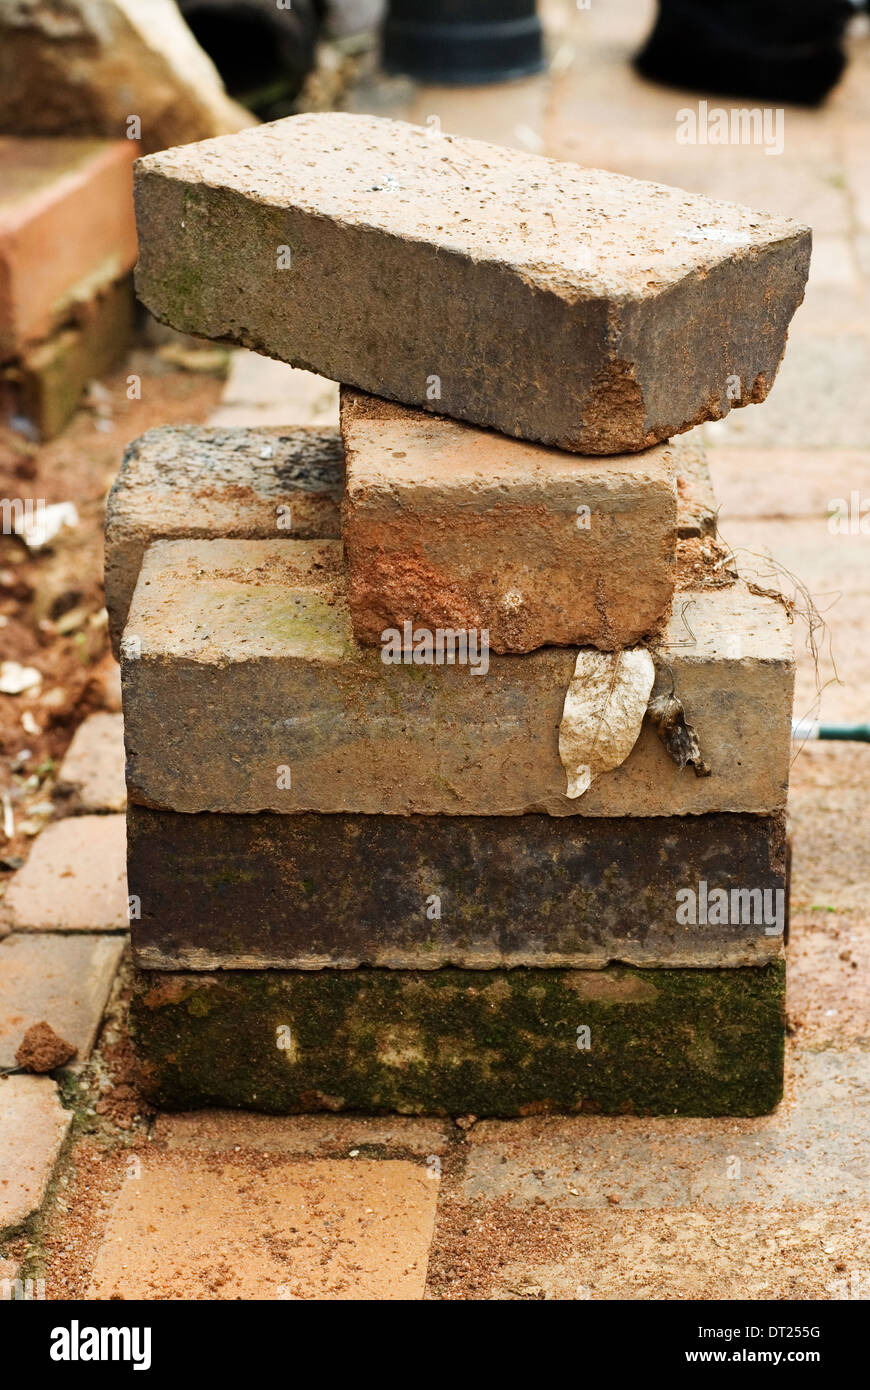 Pile or stack of old used bricks on paving. Stock Photo